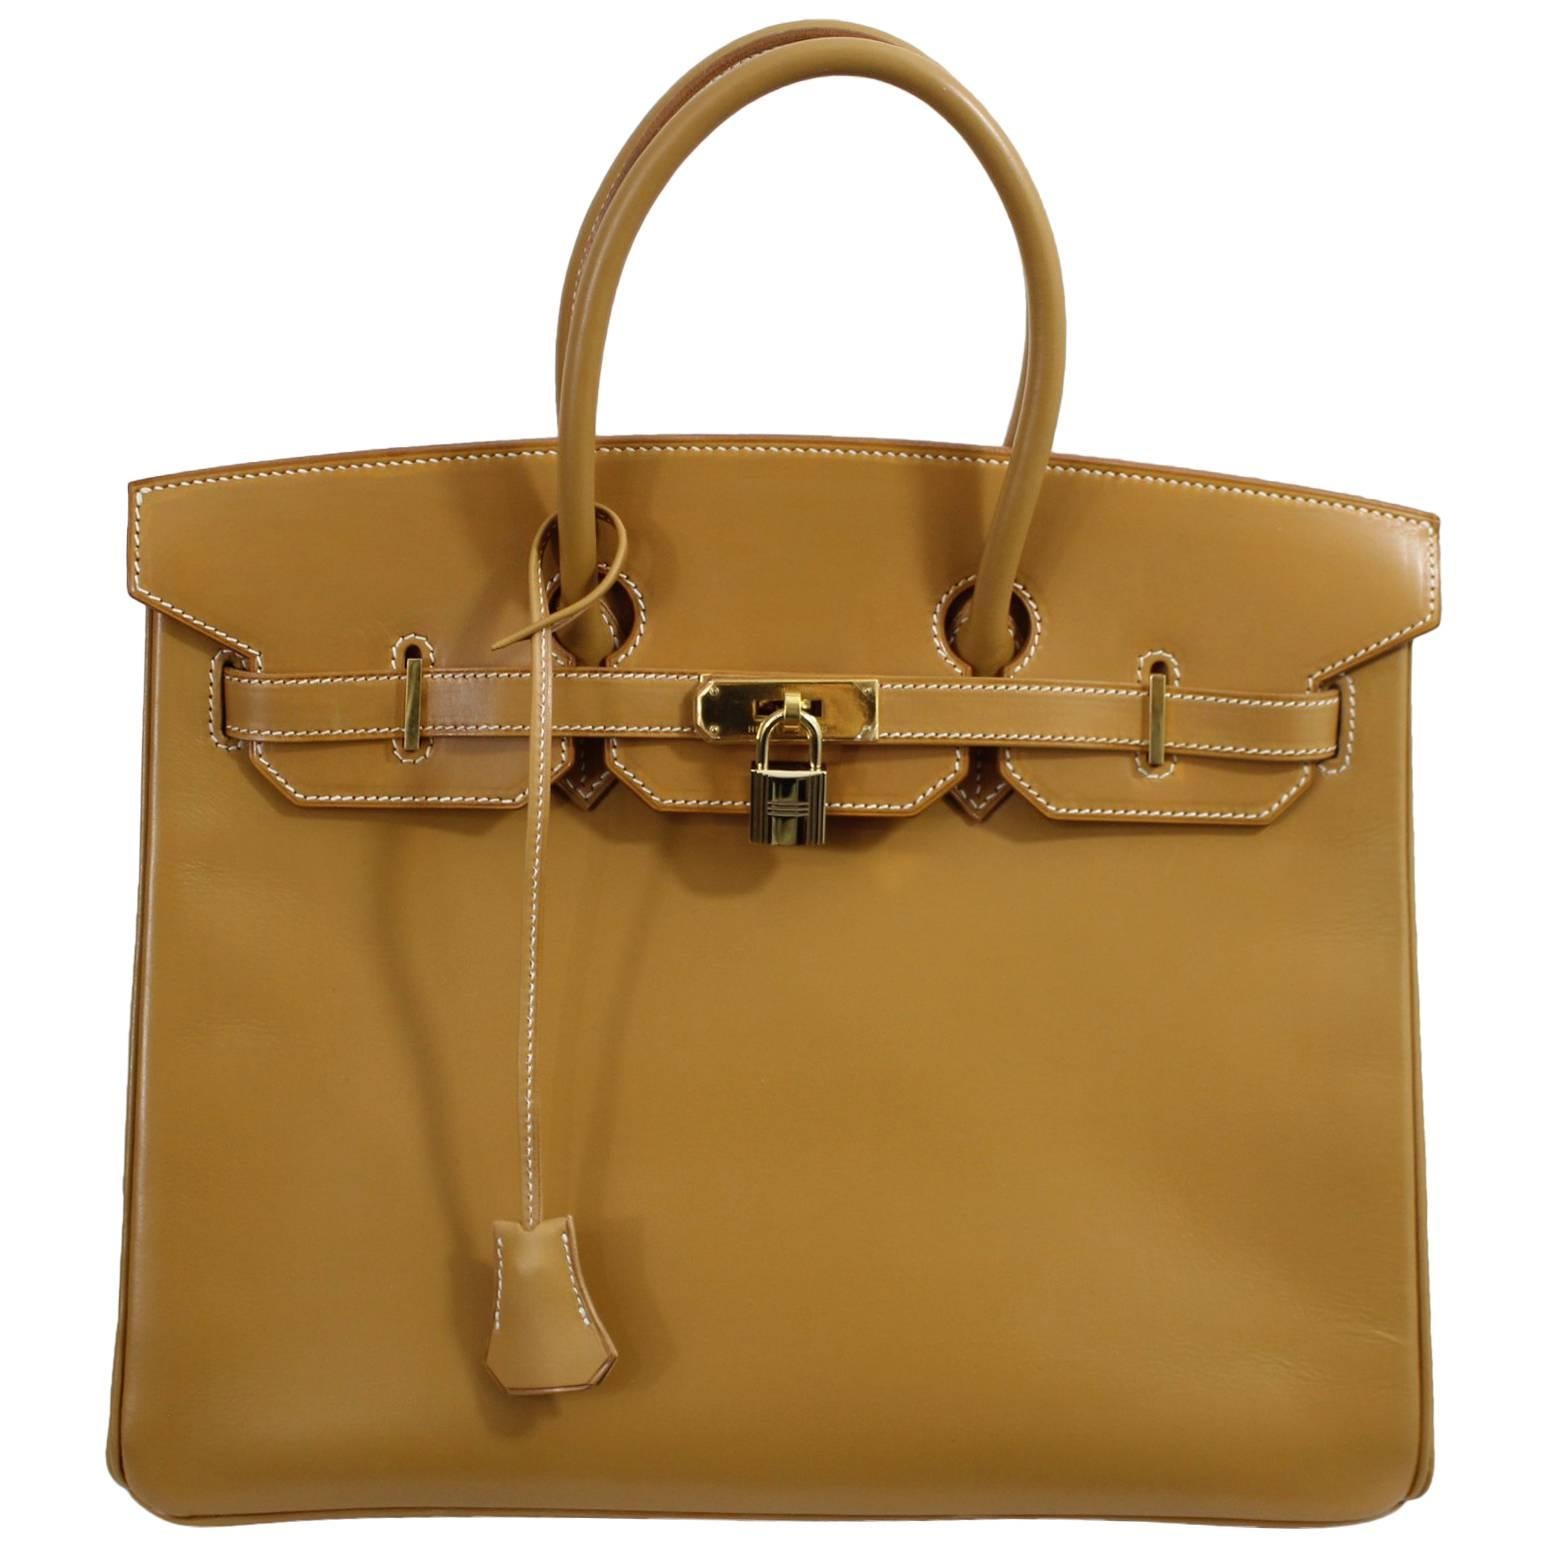 Lovely 2004 Hermes Birkin 35in Natural Calf Leather. Excellent condition. 